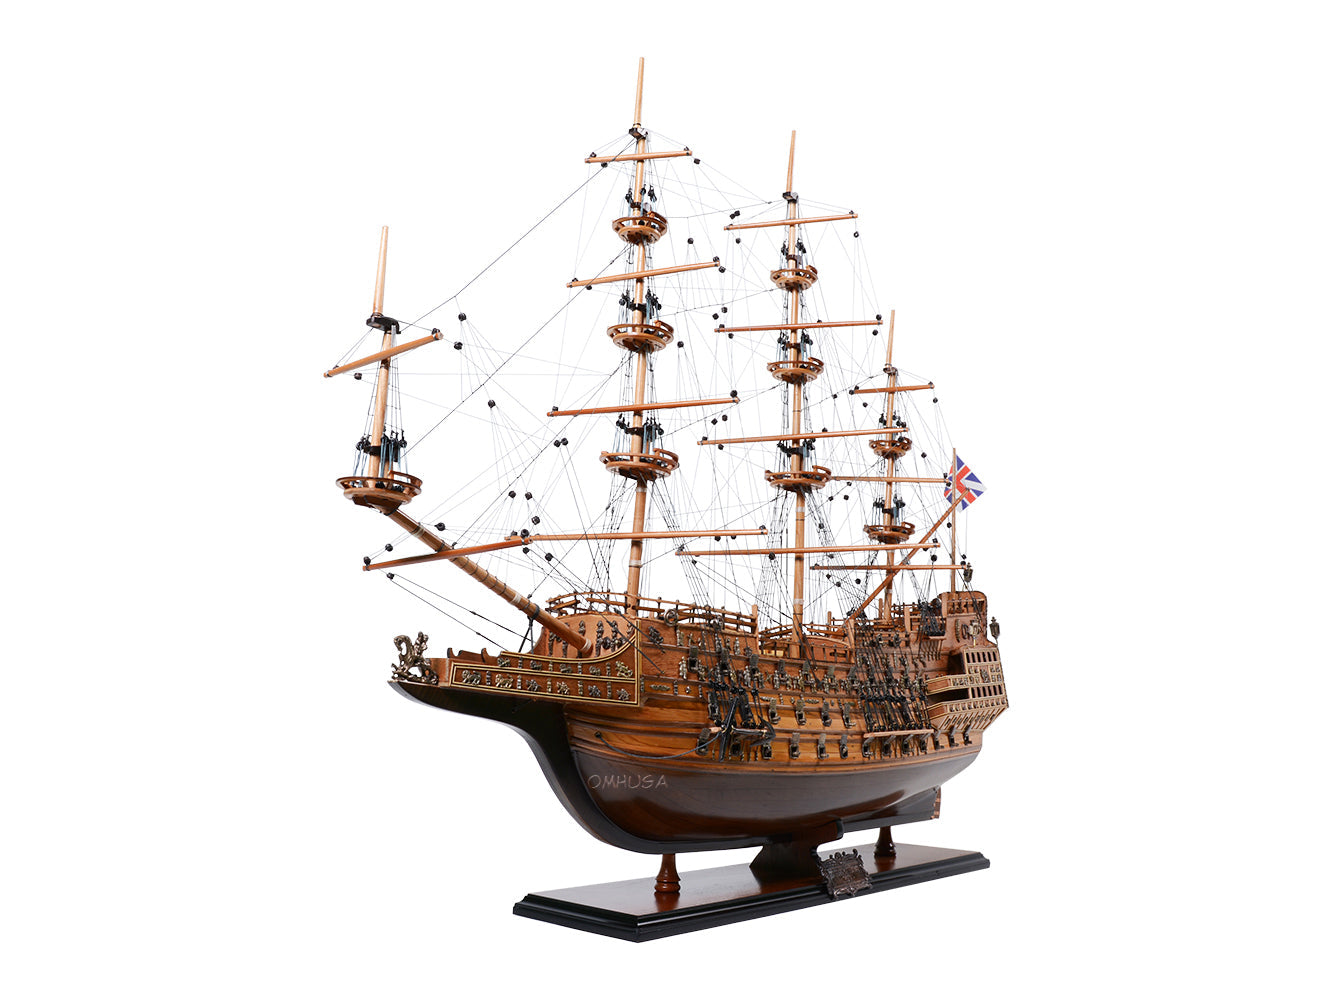 Aldo Hobbies & Creative Arts> Collectibles> Scale Model new / Wood / L: 35 W: 11.5 H: 32.5 Inches HMS Sovereign Of The Seas Tall Ship Small  Wood Model Sailboat No Sails Assembled